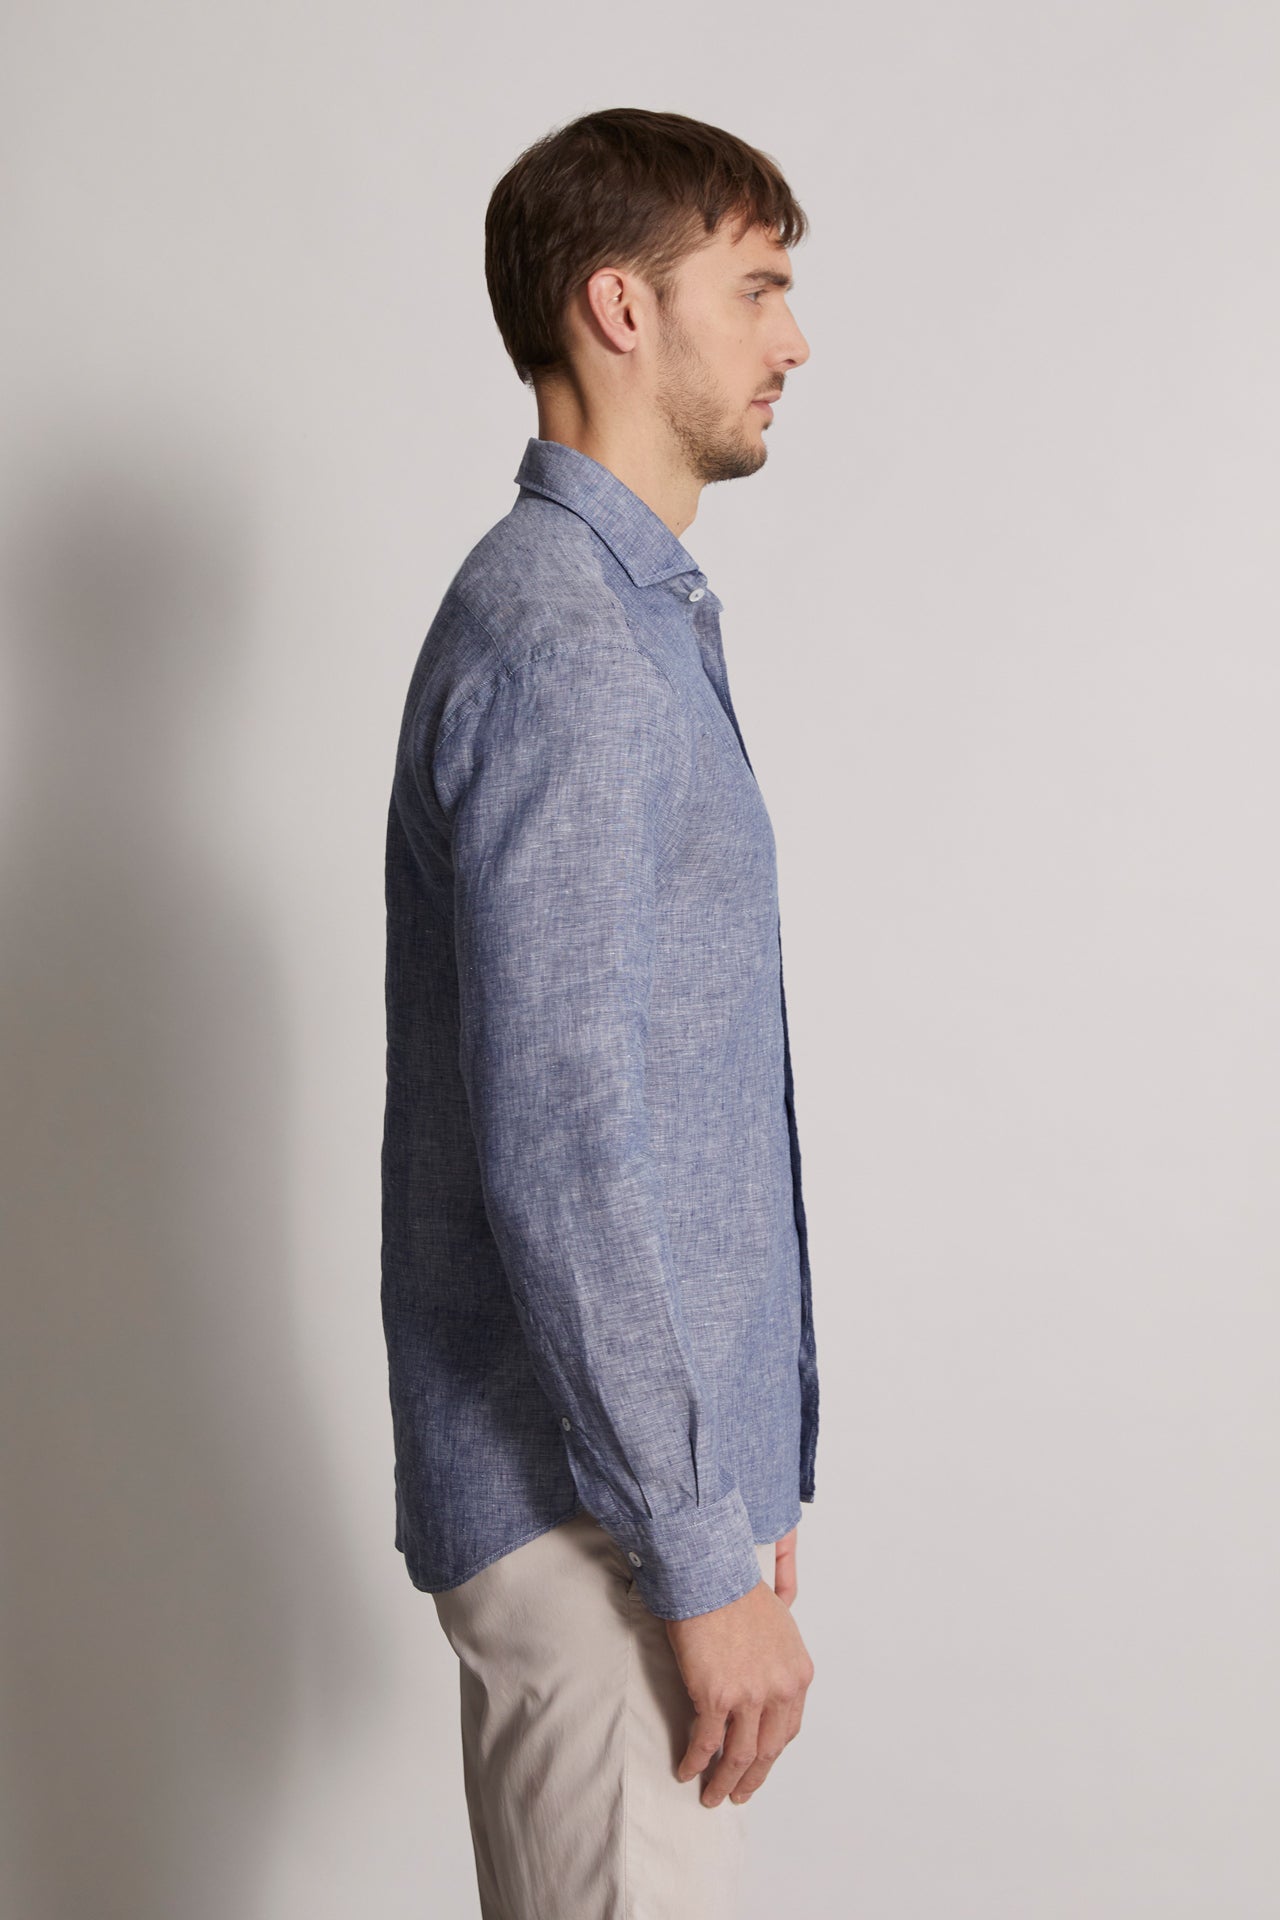 Roby shirt in linen denim fabric